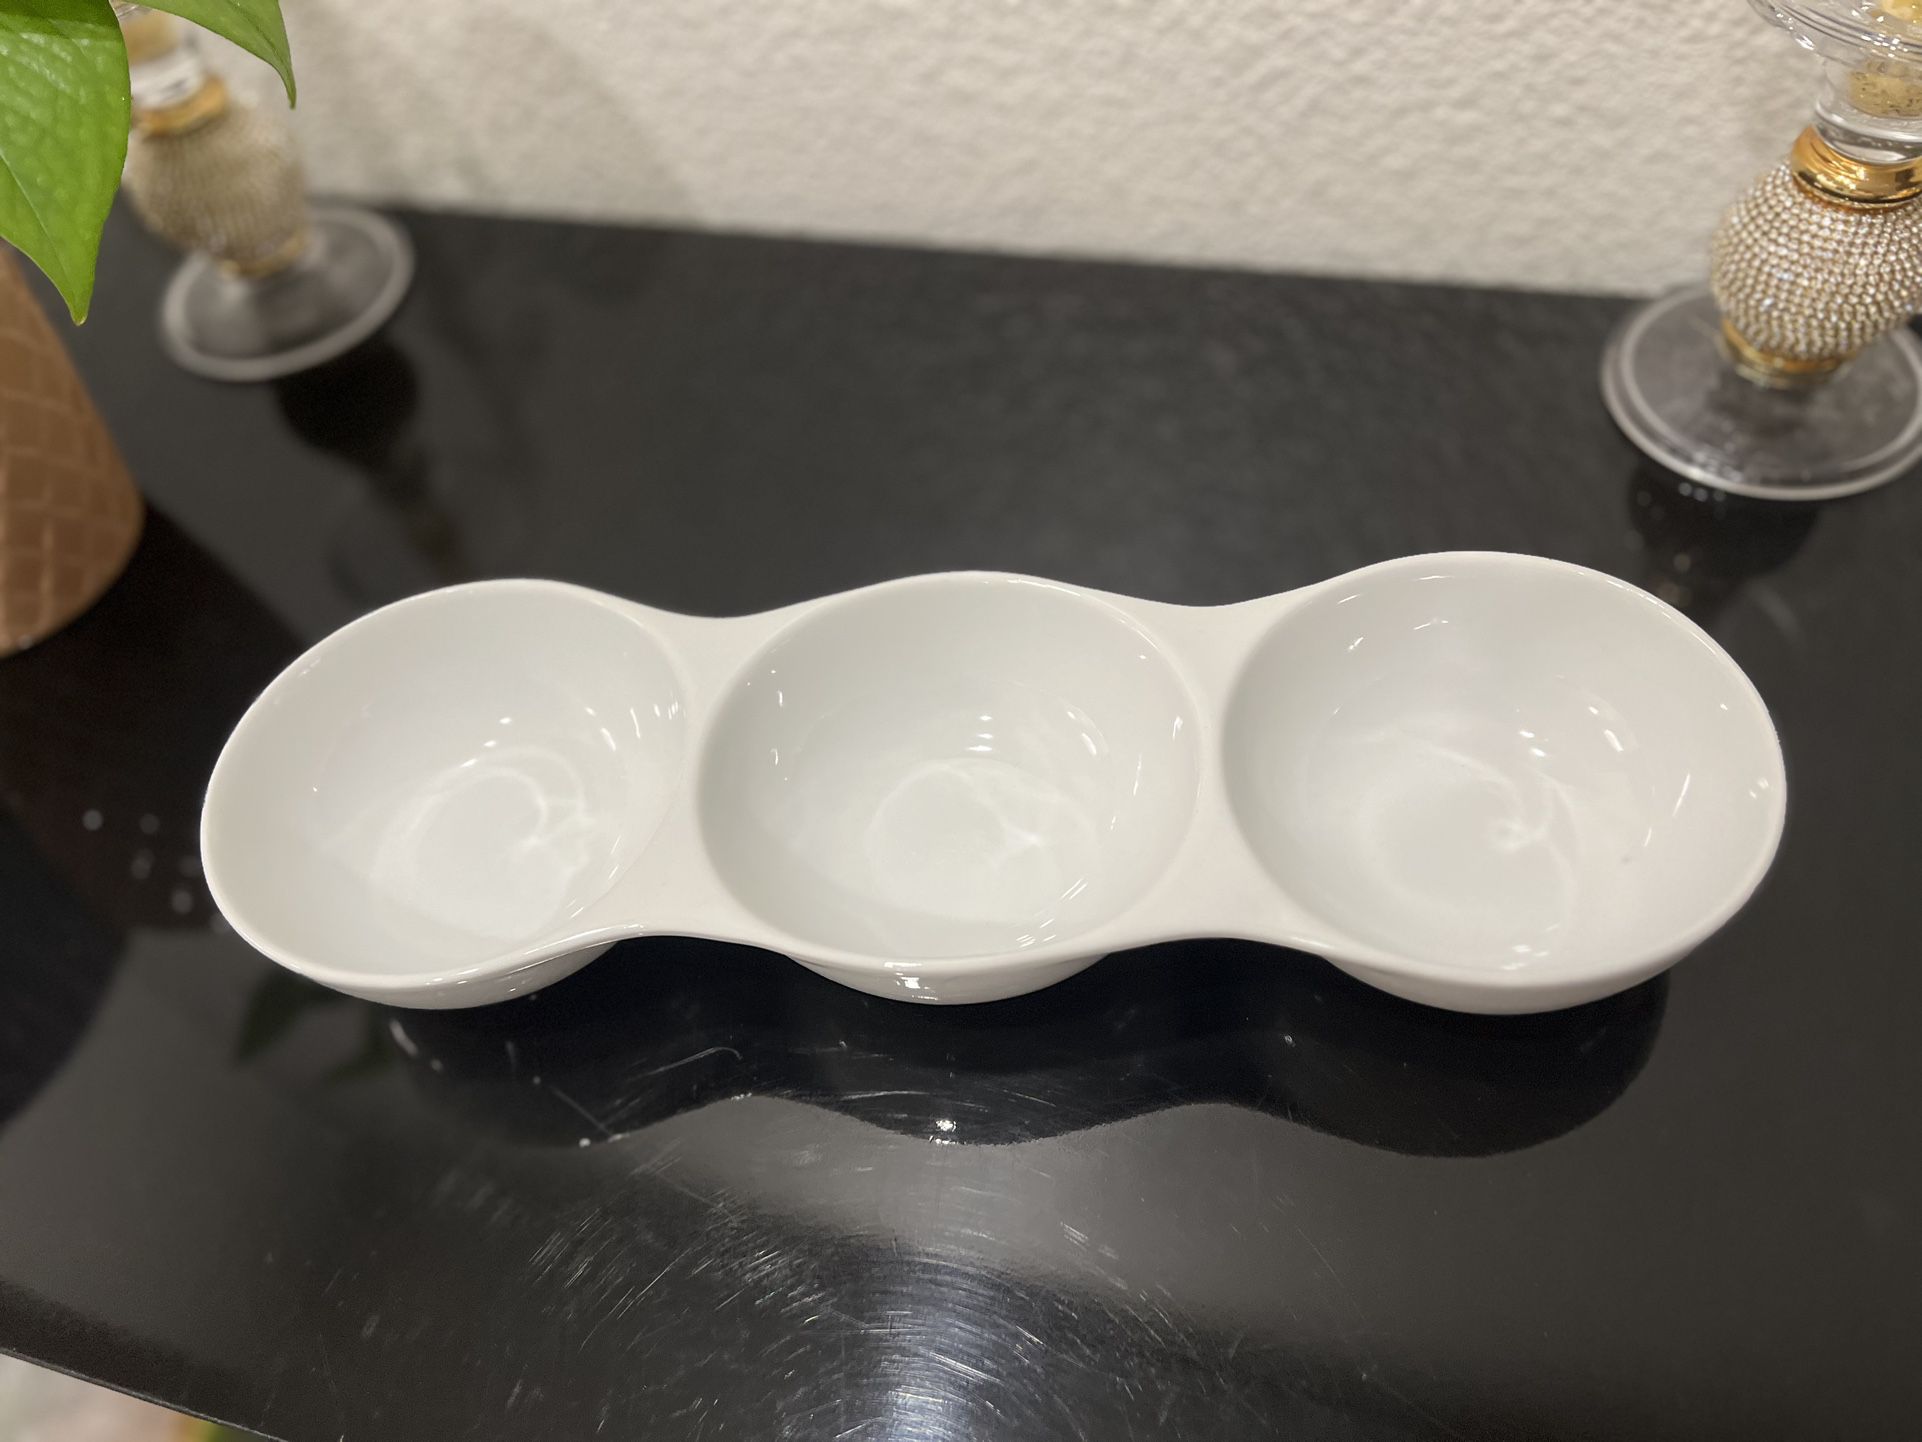 3 Bowl Serving Plate - New In Box